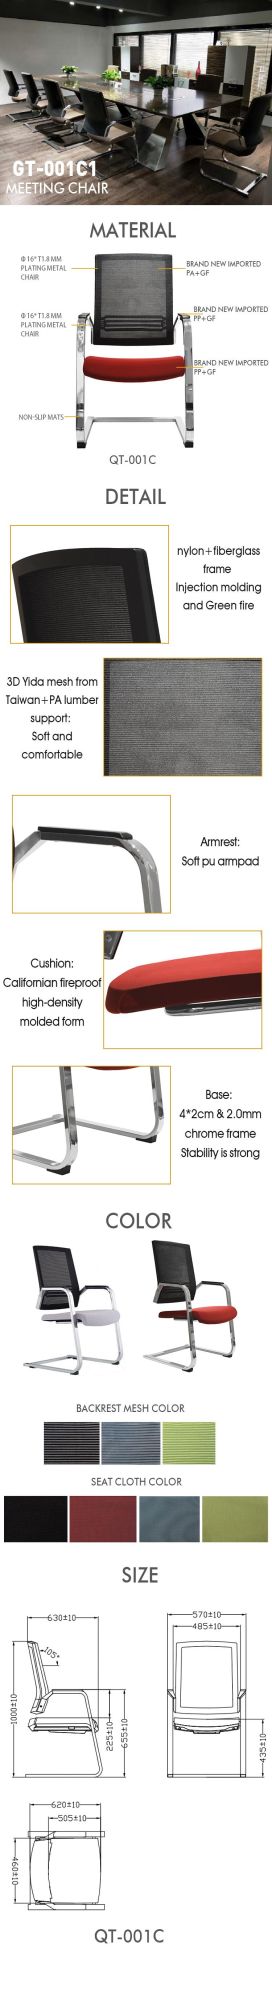 74*59*63 Fixed Huy Stand Export Packing Made in China Swivel Conference Chair